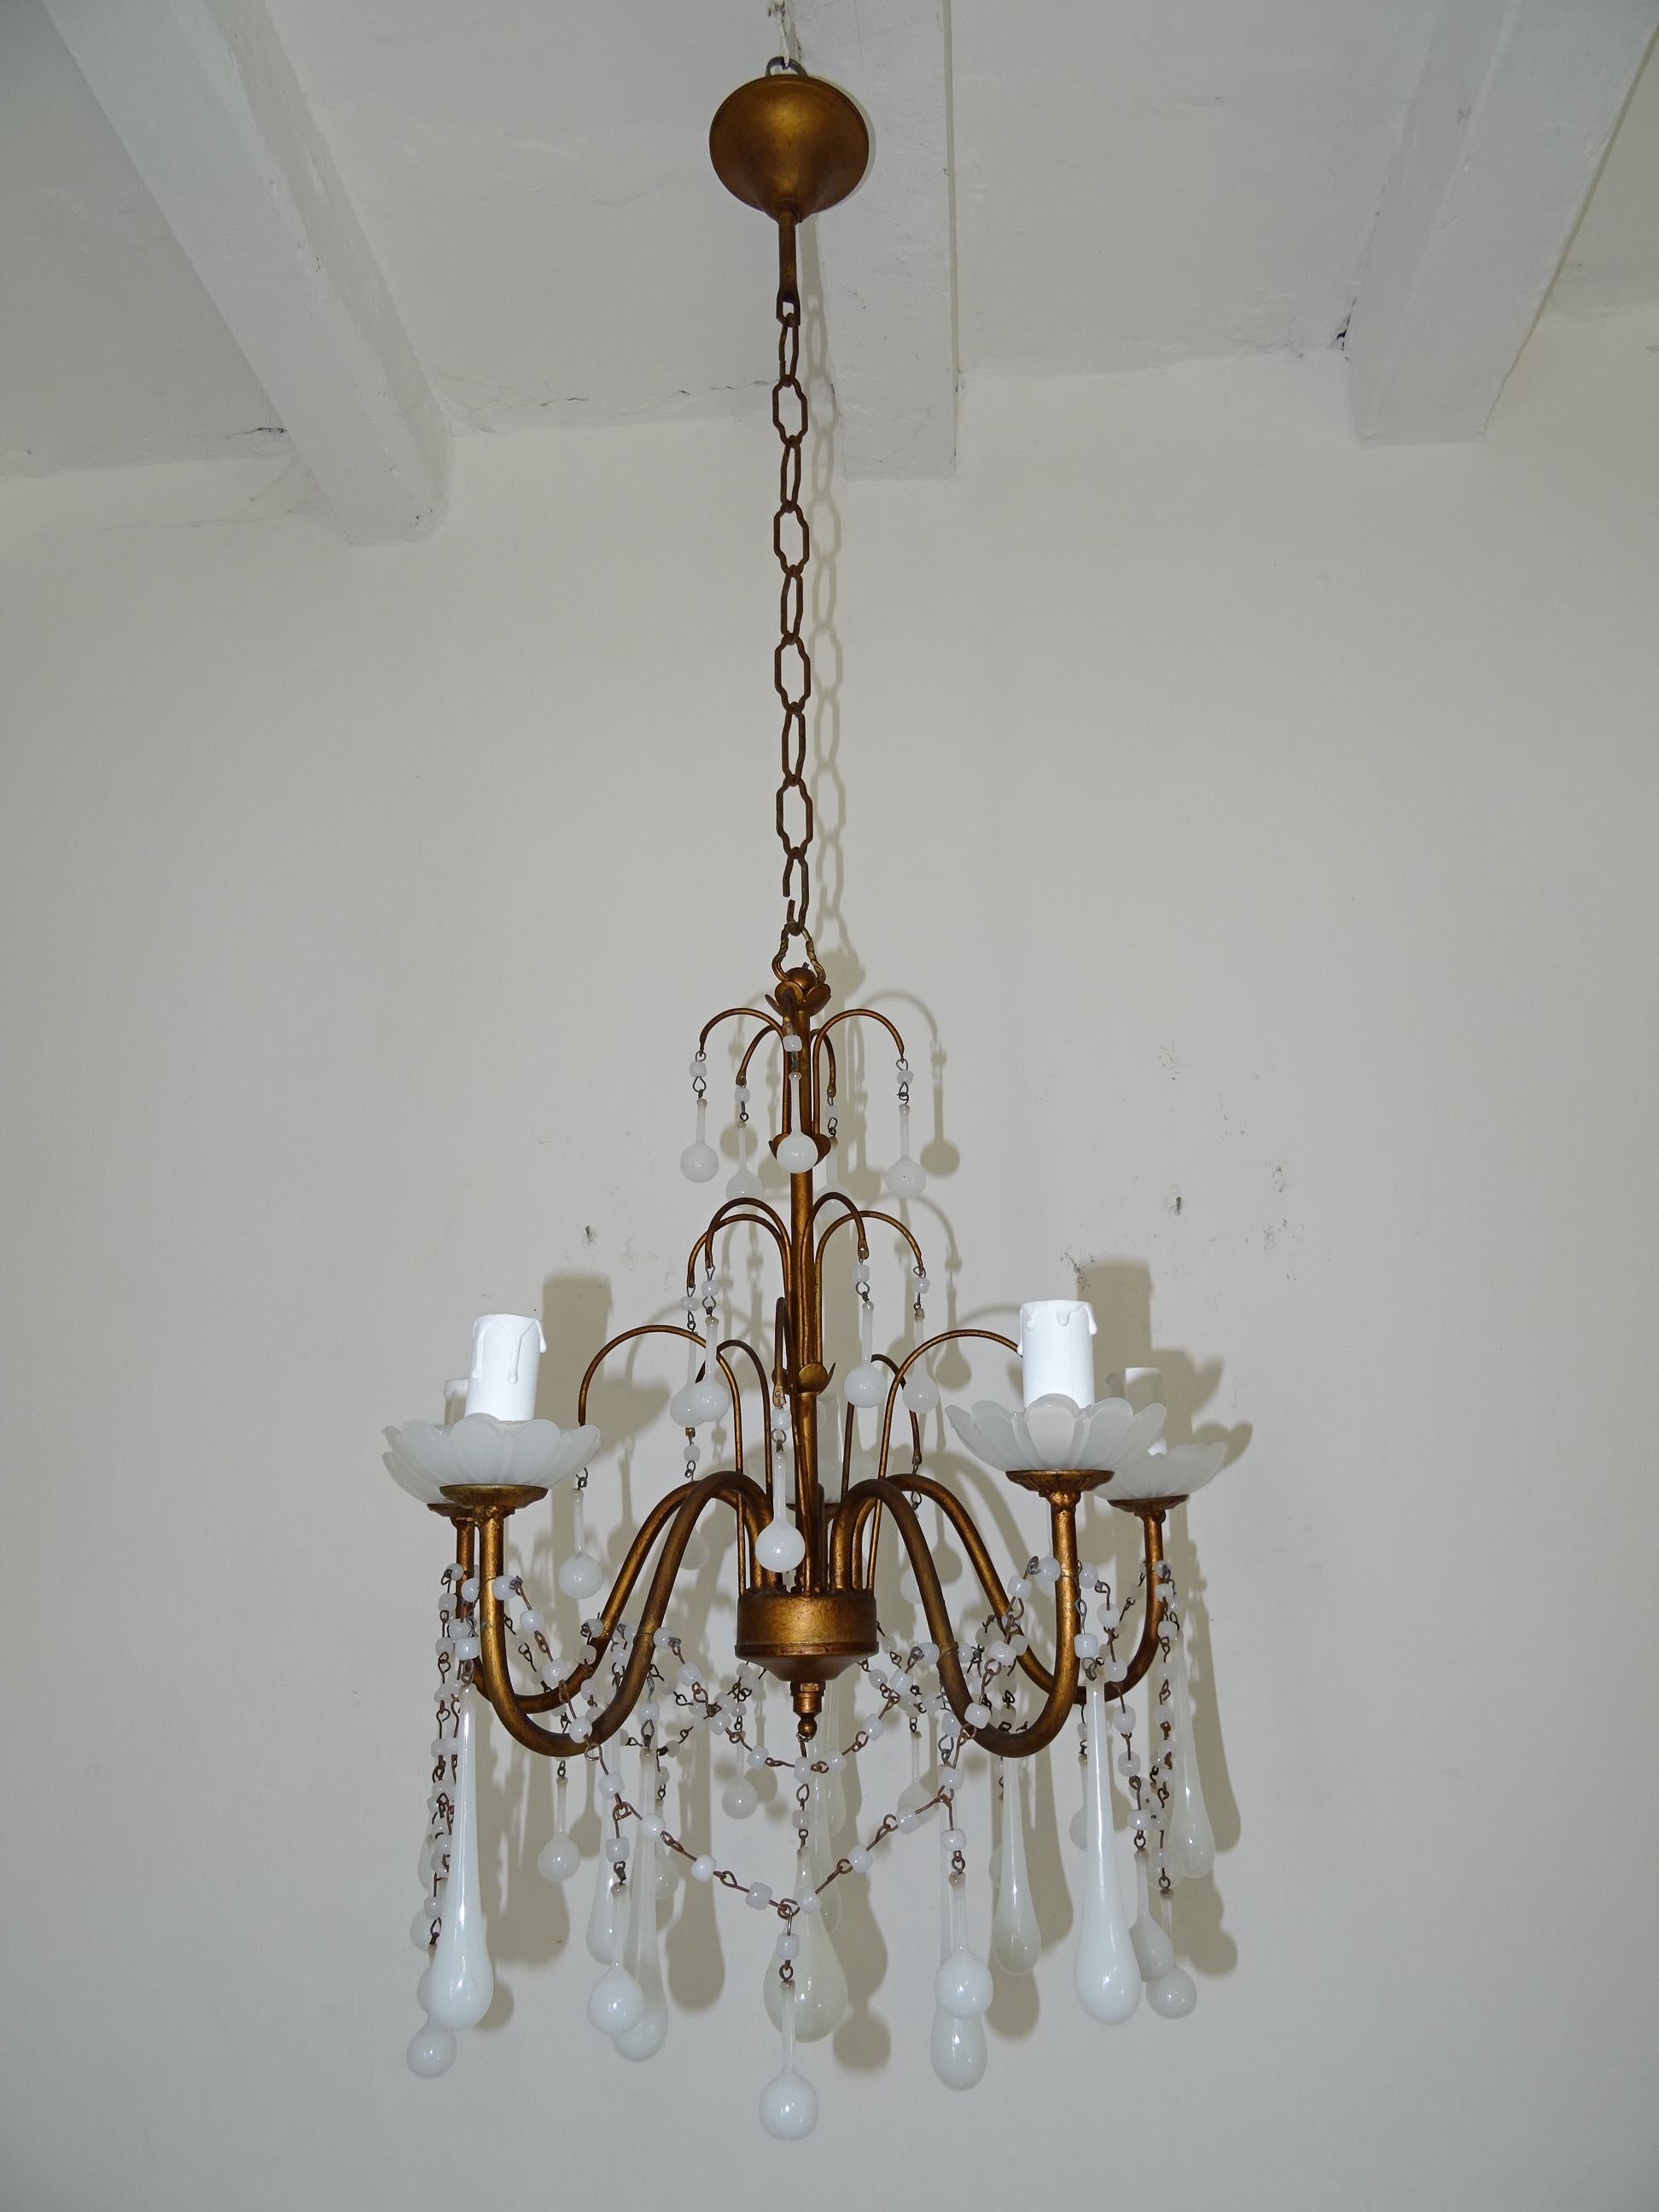 Murano Glass 1930 French White Opaline Bobeches, Beads and Drops Chandelier For Sale